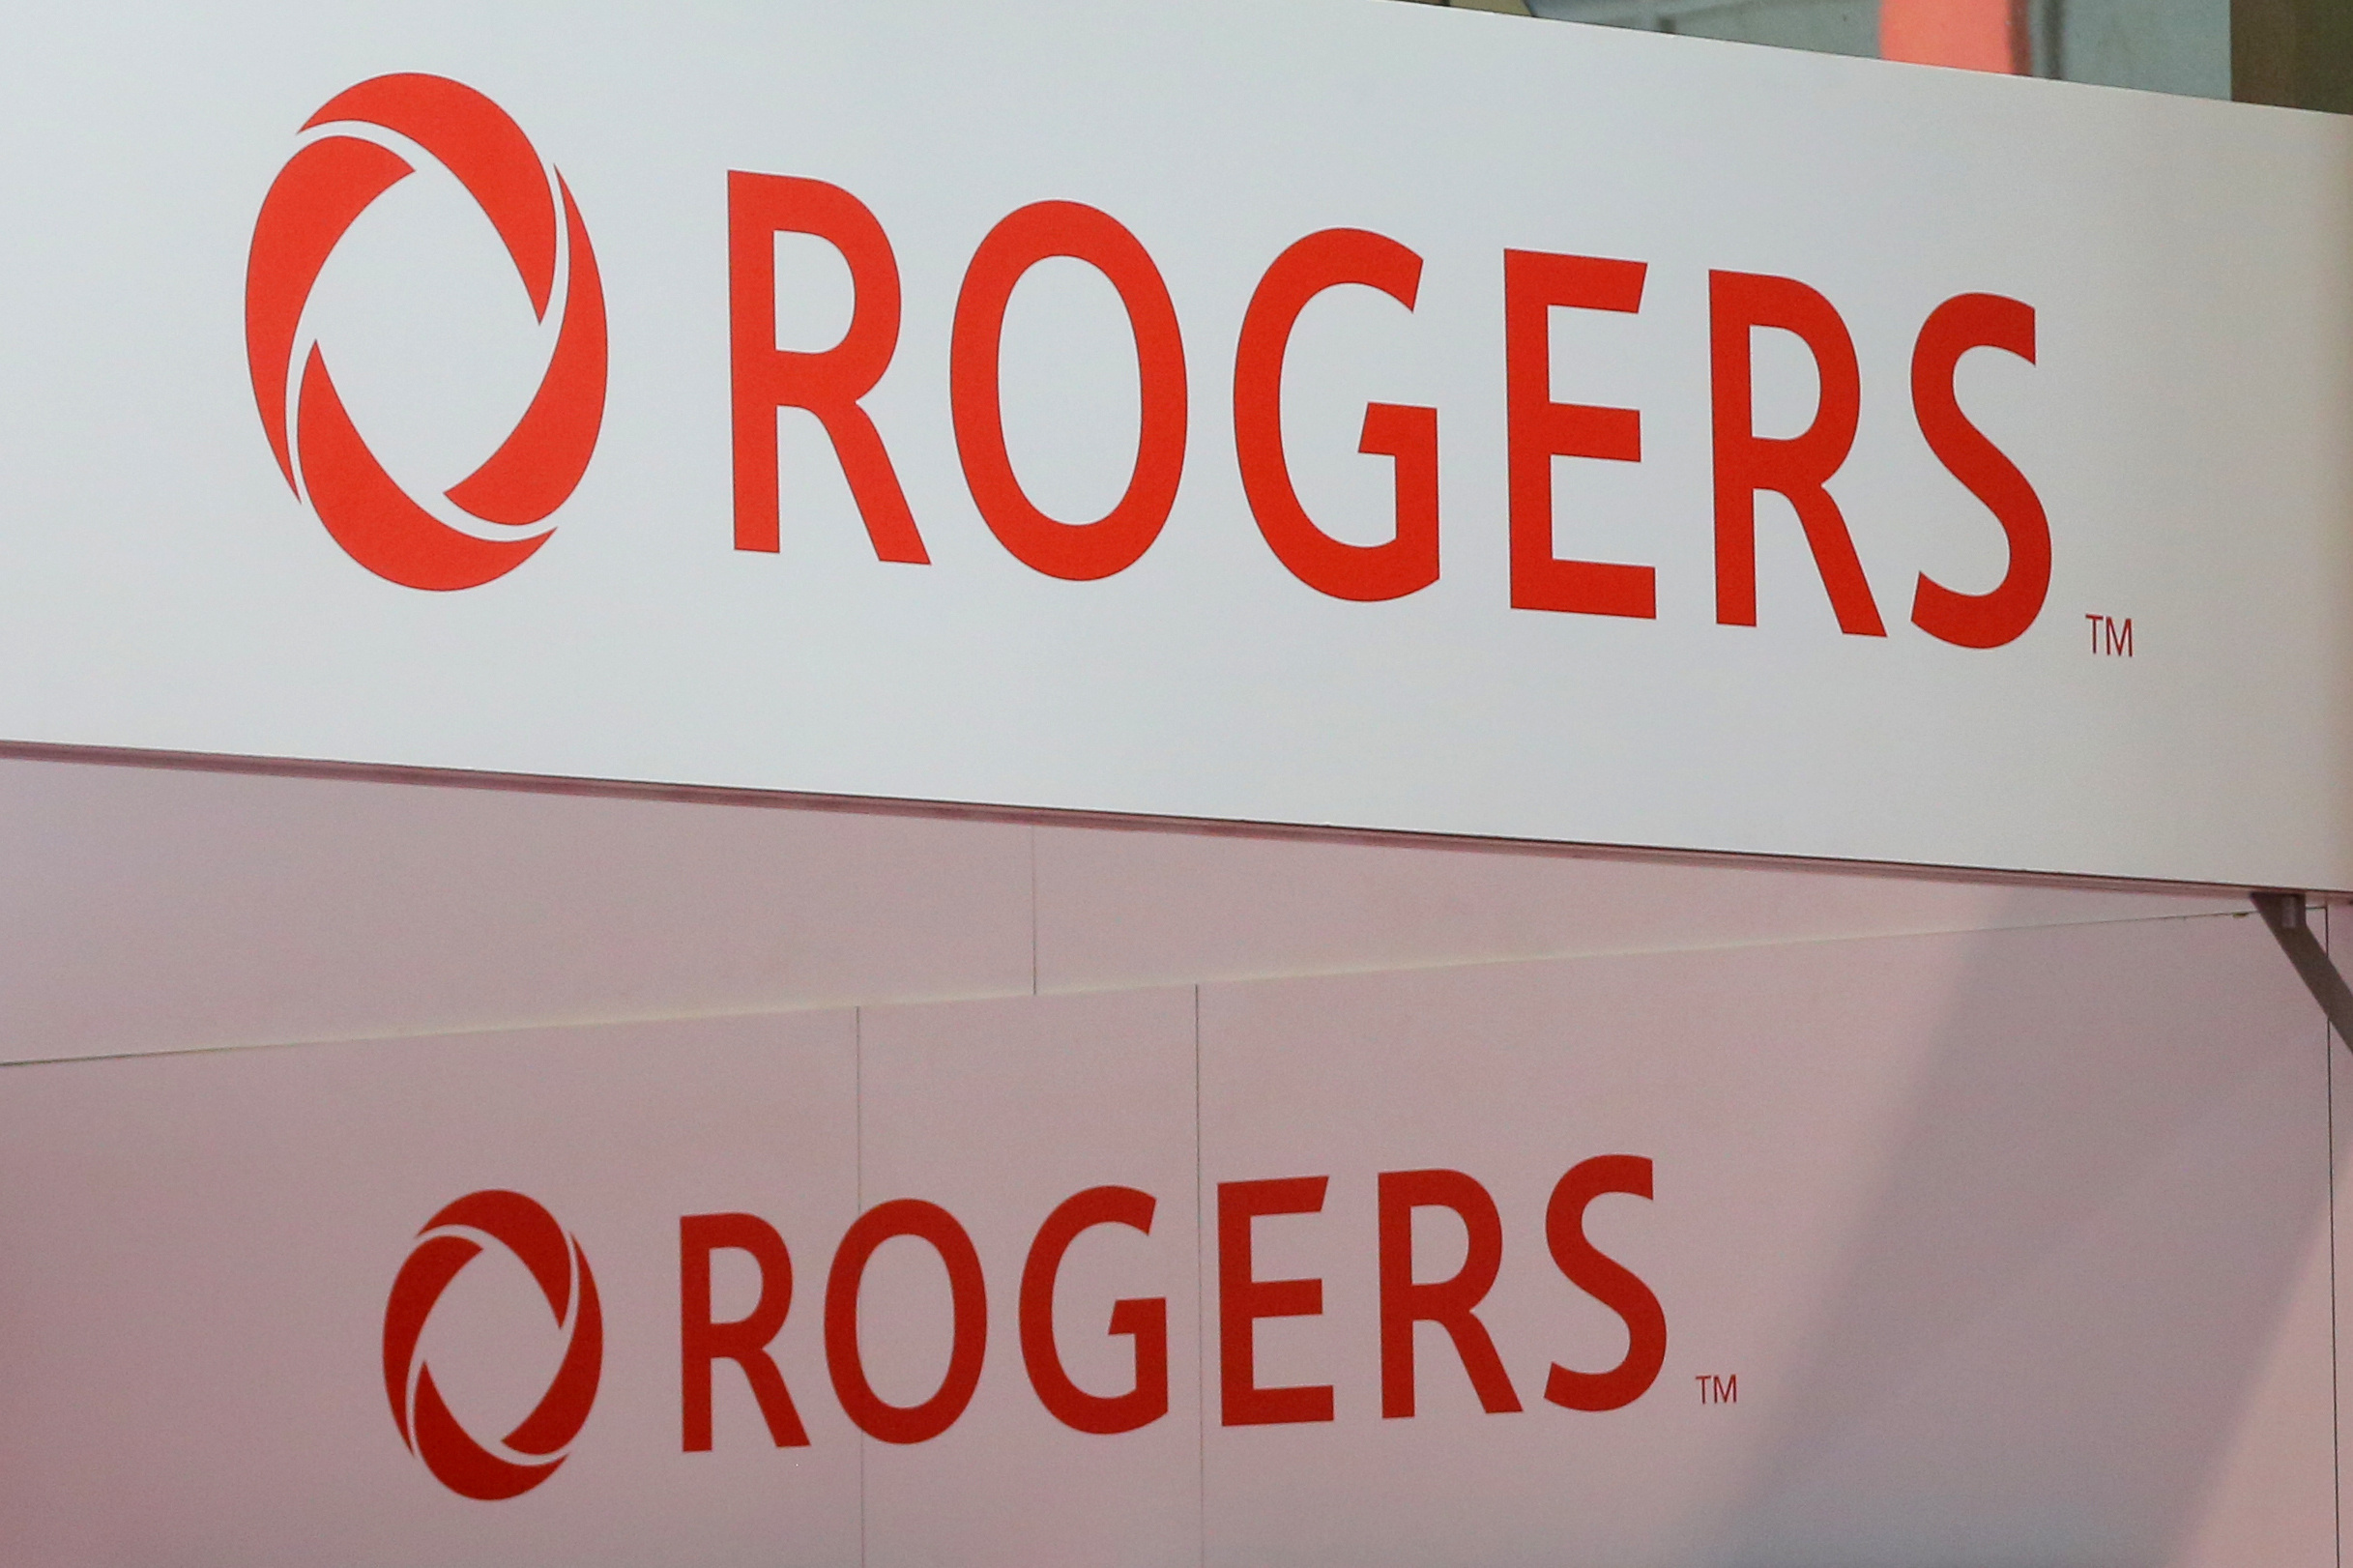 Rogers Communications logos are seen above a booth at the Canadian International AutoShow in Toronto